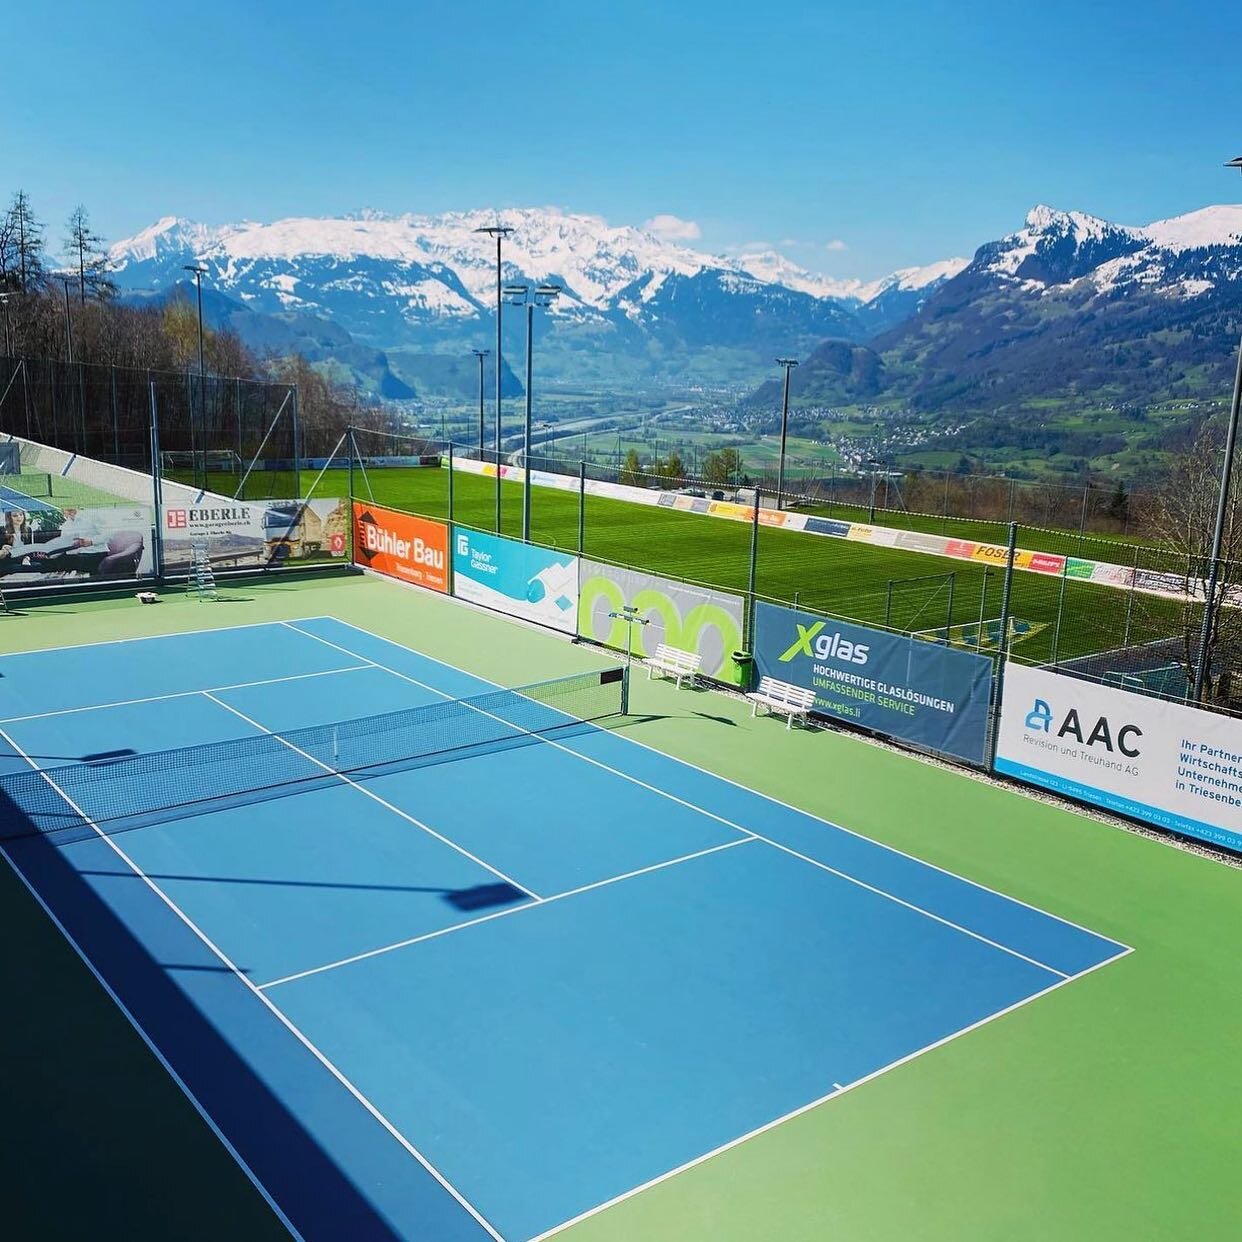 Double tap if you&rsquo;d love to play tennis at @tennisclub_triesenberg 💯👆🎾 @HITWITHME

🏷
#tennis #tenniscourt #tennisplayer #tennislife #tenis #tennis🎾 #triesenberg